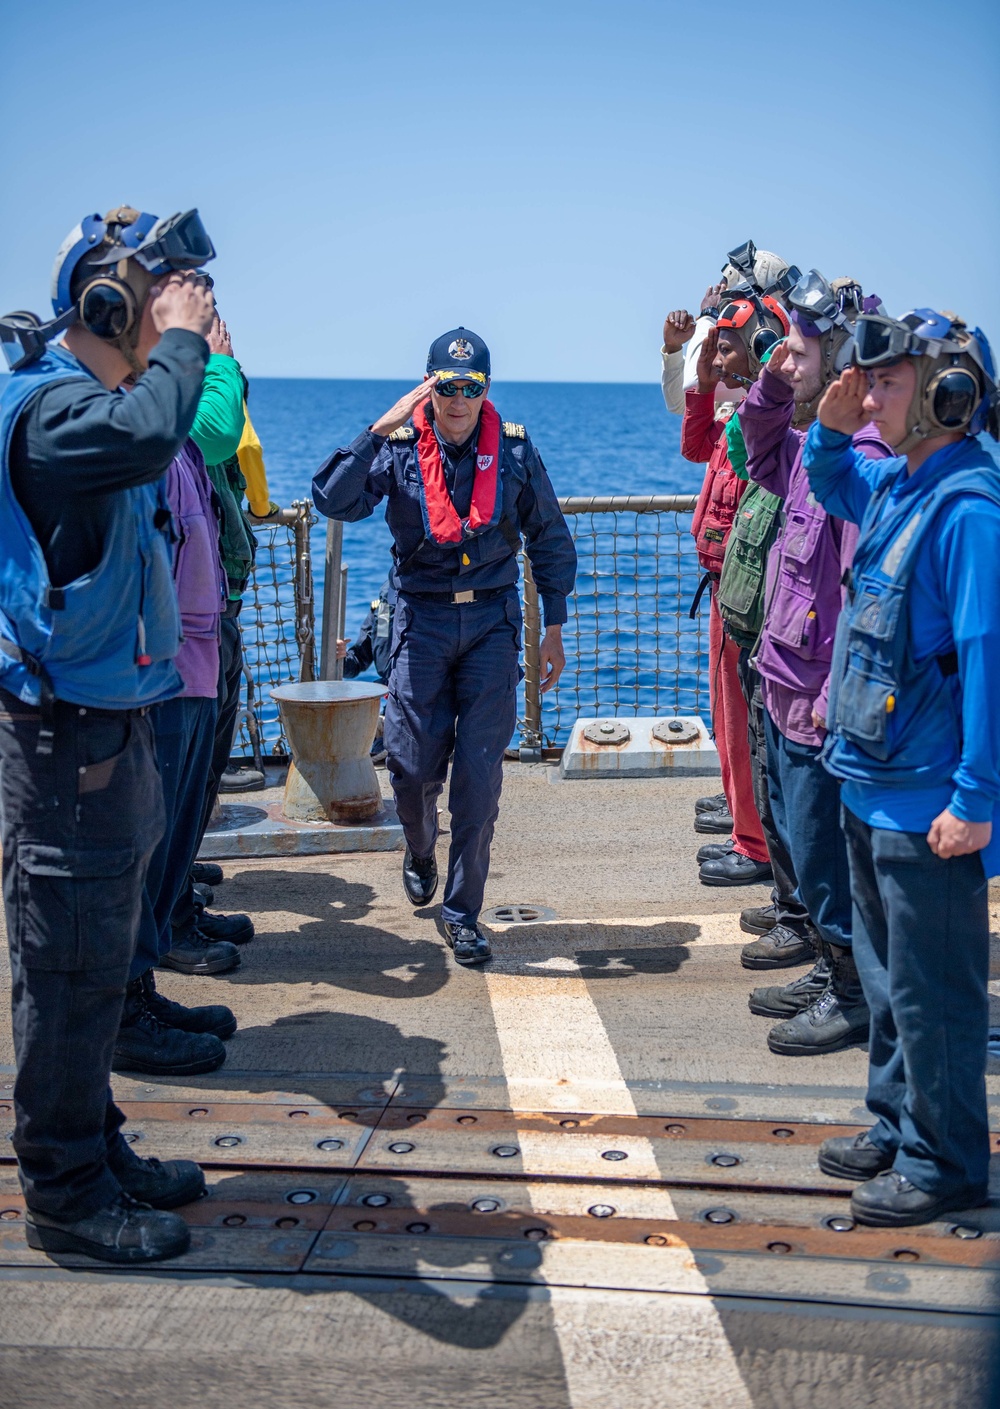 Bainbridge is on a scheduled deployment in the U.S. Naval Forces Europe area of operations, employed by U.S. Sixth Fleet to defend U.S., Allied and Partner interests.